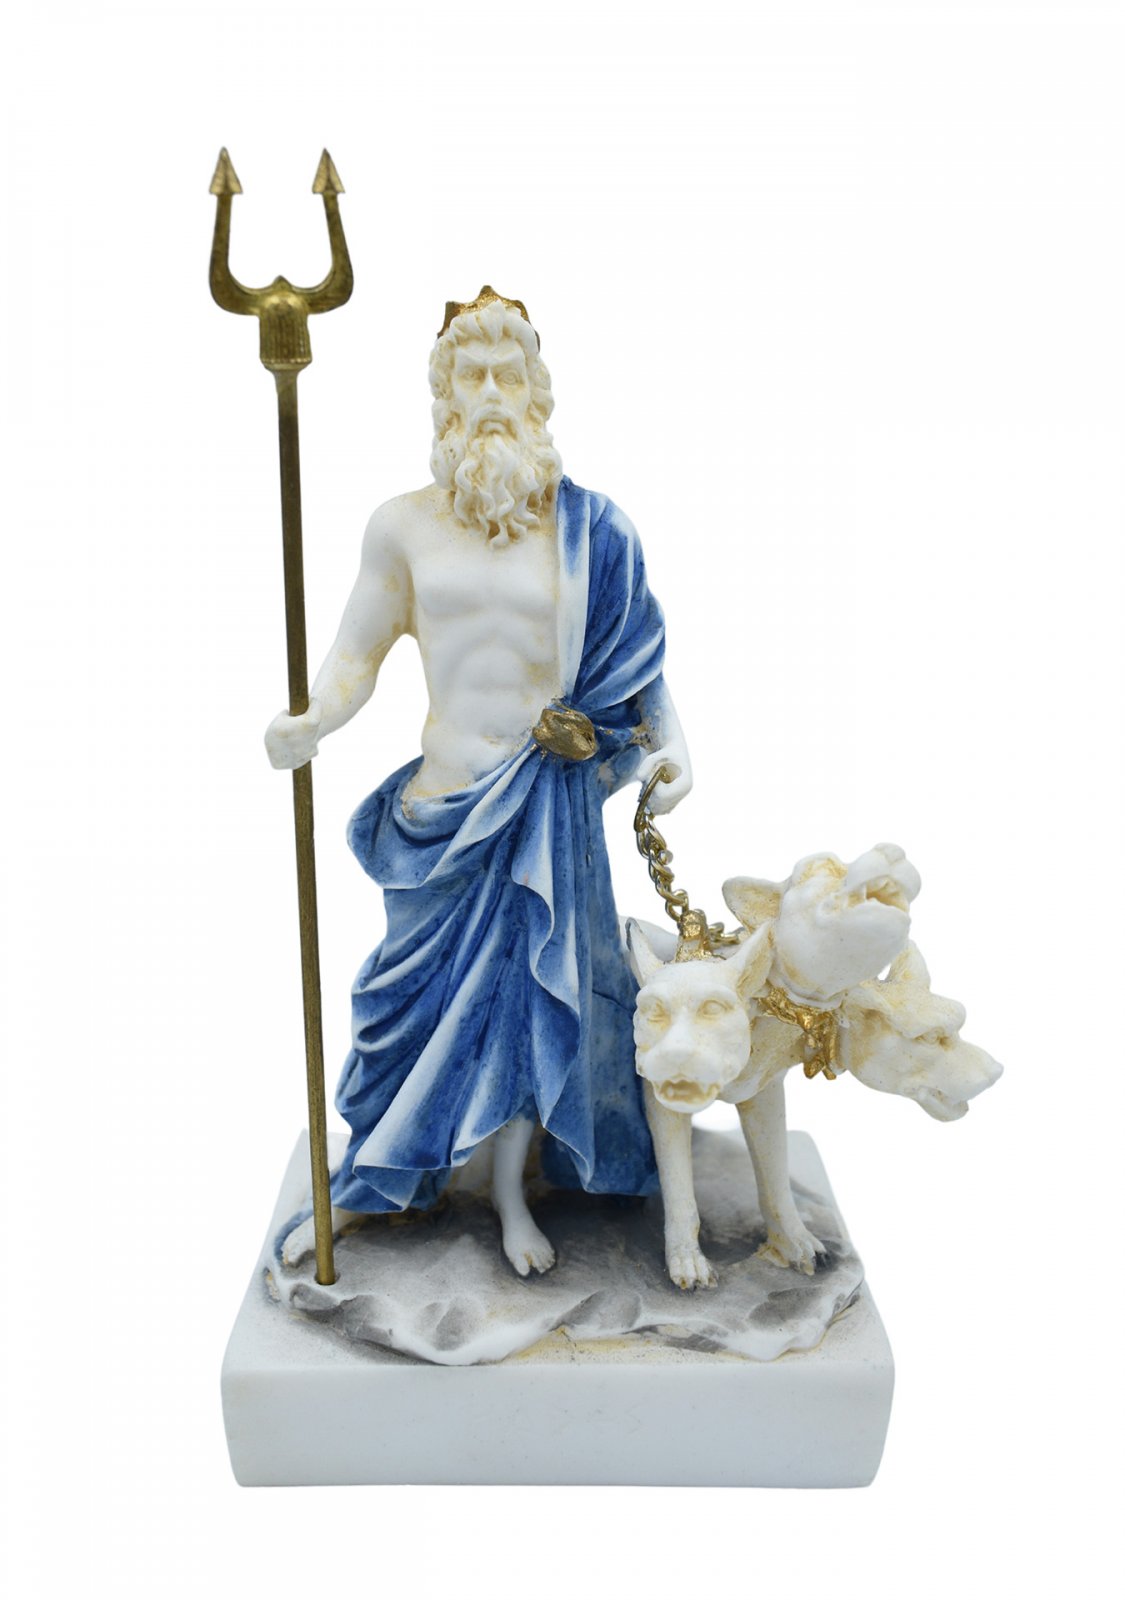 Hades, Pluto, God of the dead and the king of the underworld, small alabaster statue with color